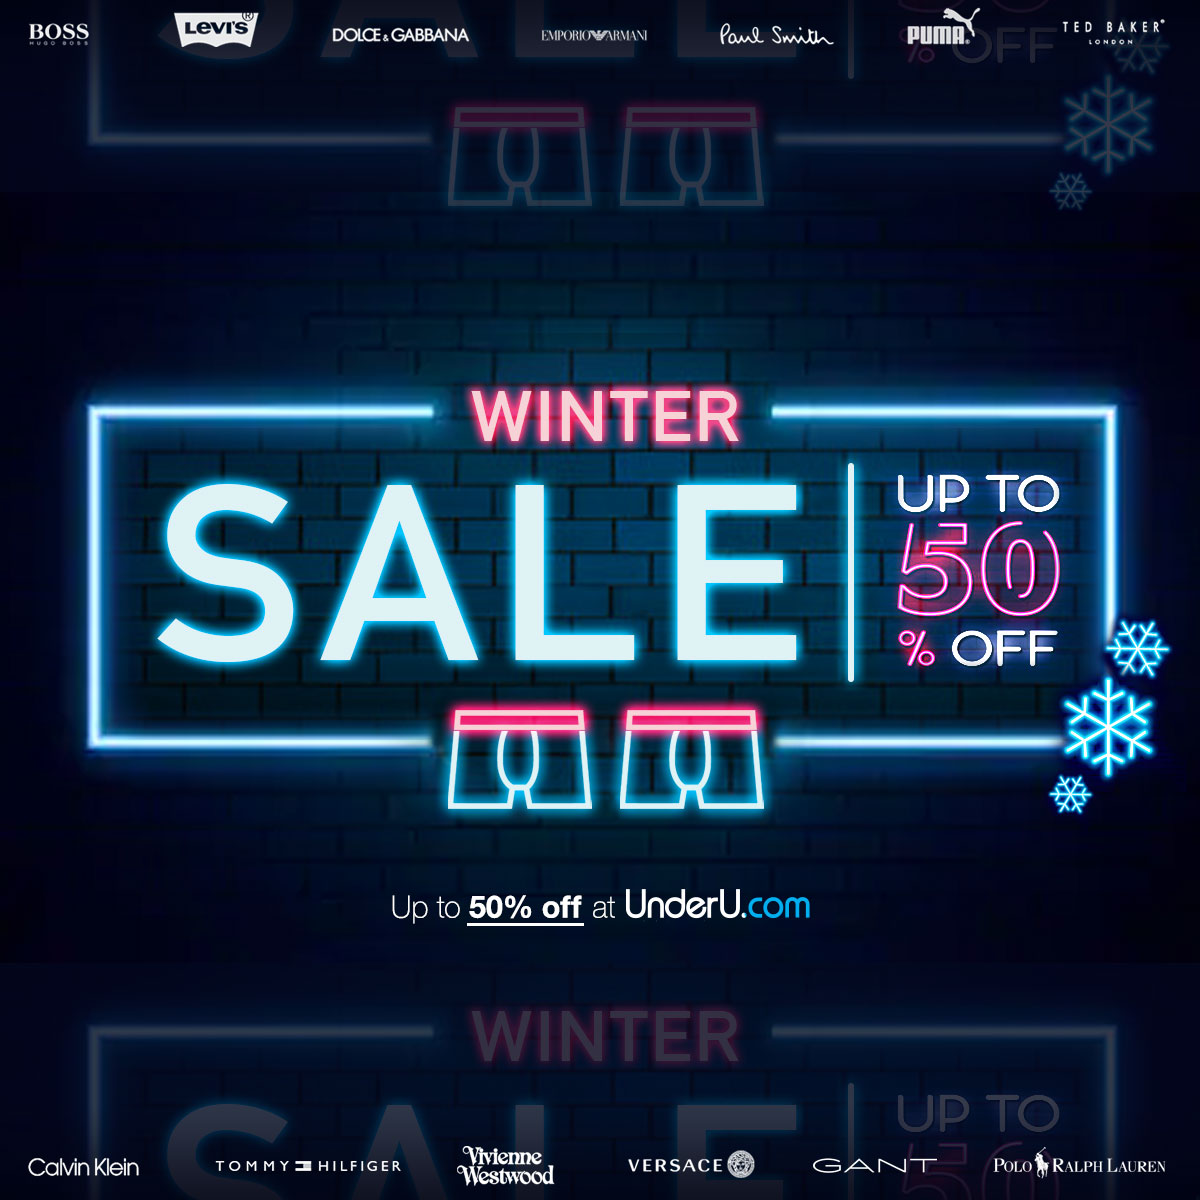 up to 50% off SALE